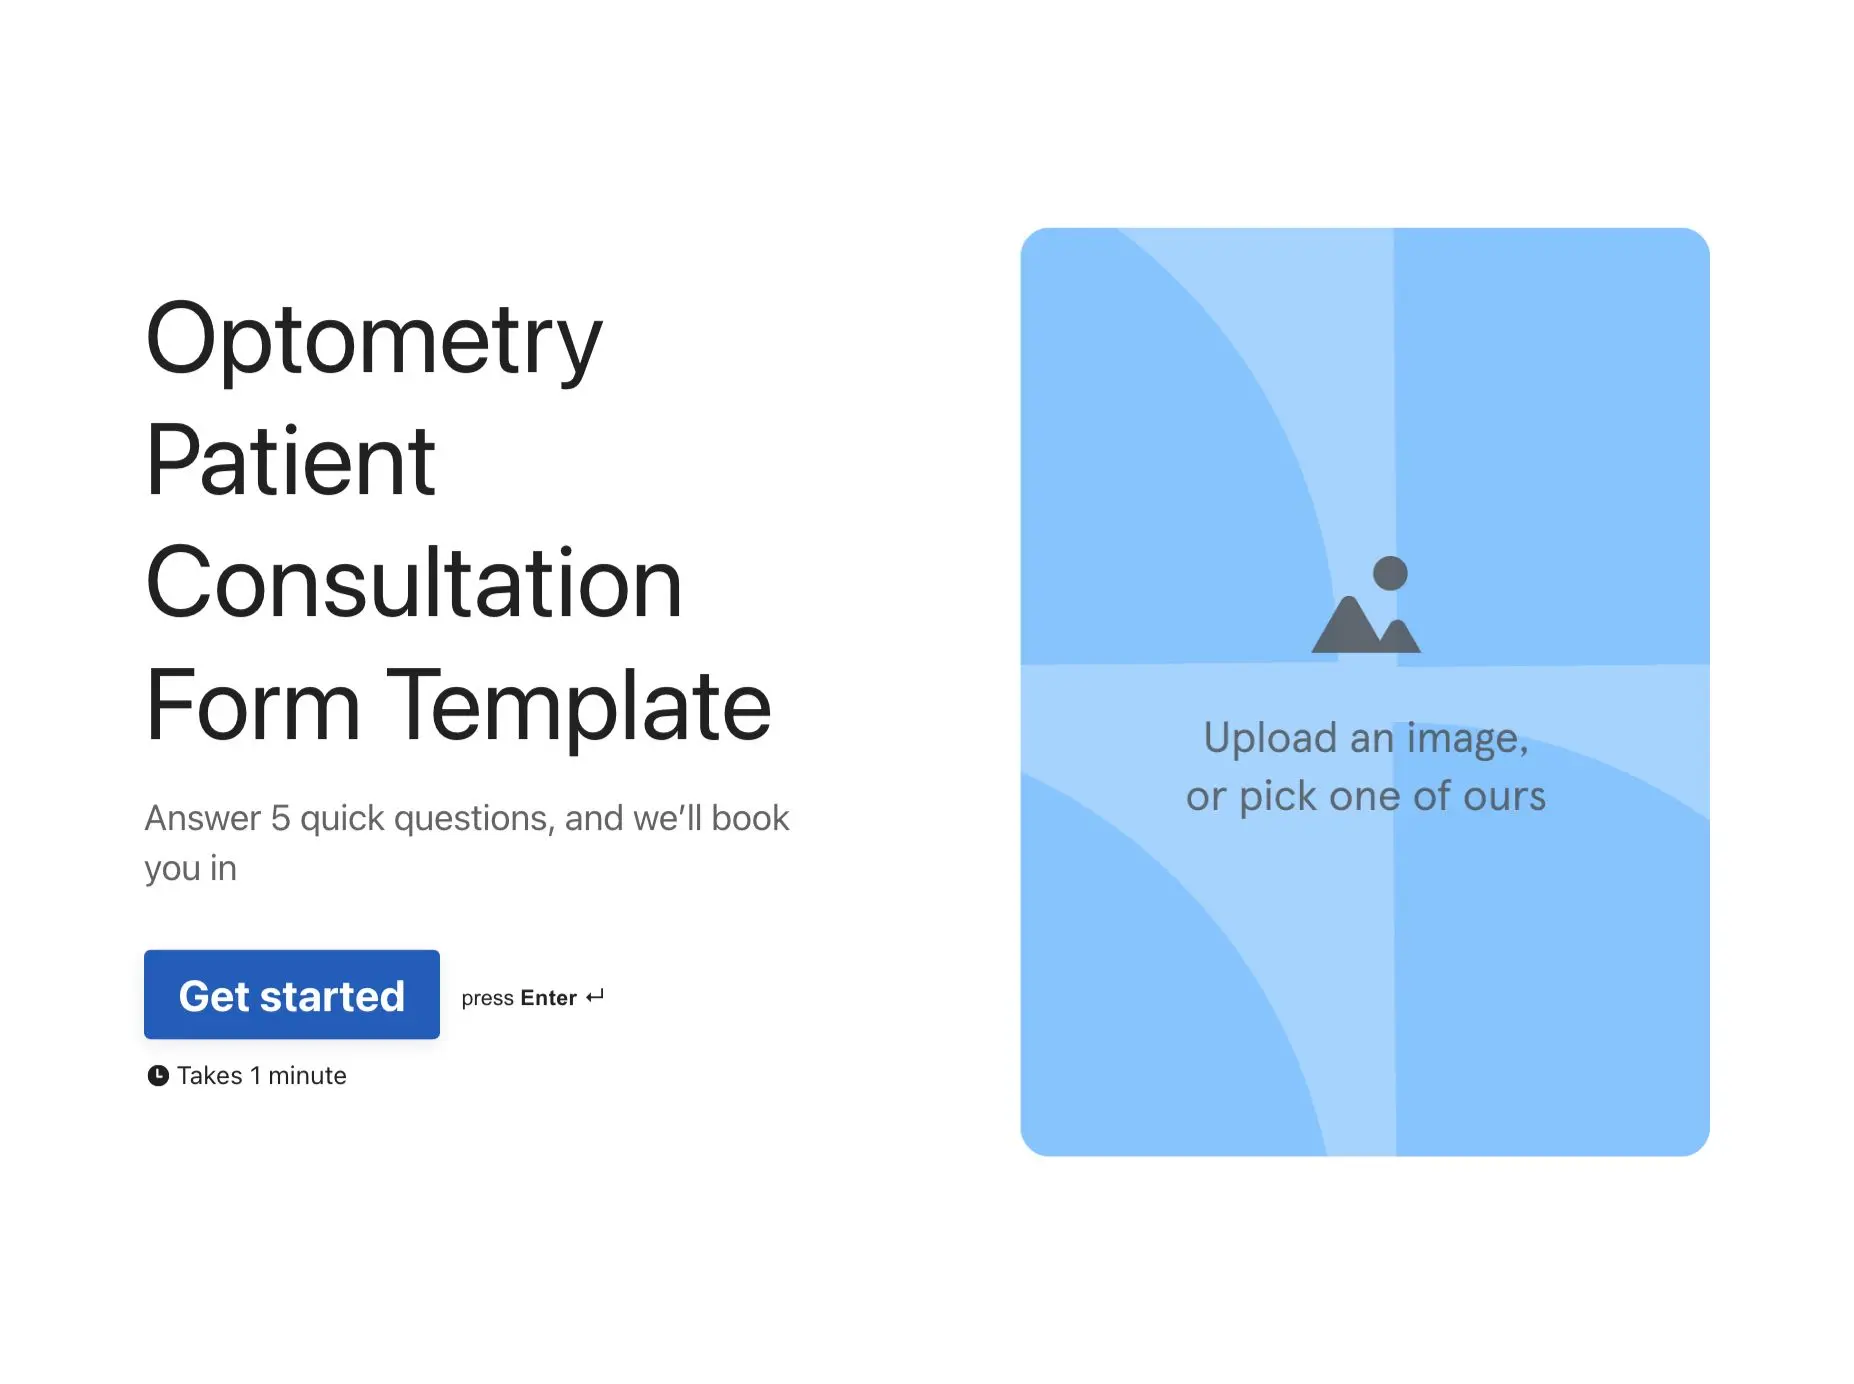 Optometry Patient Consultation Form Template Hero